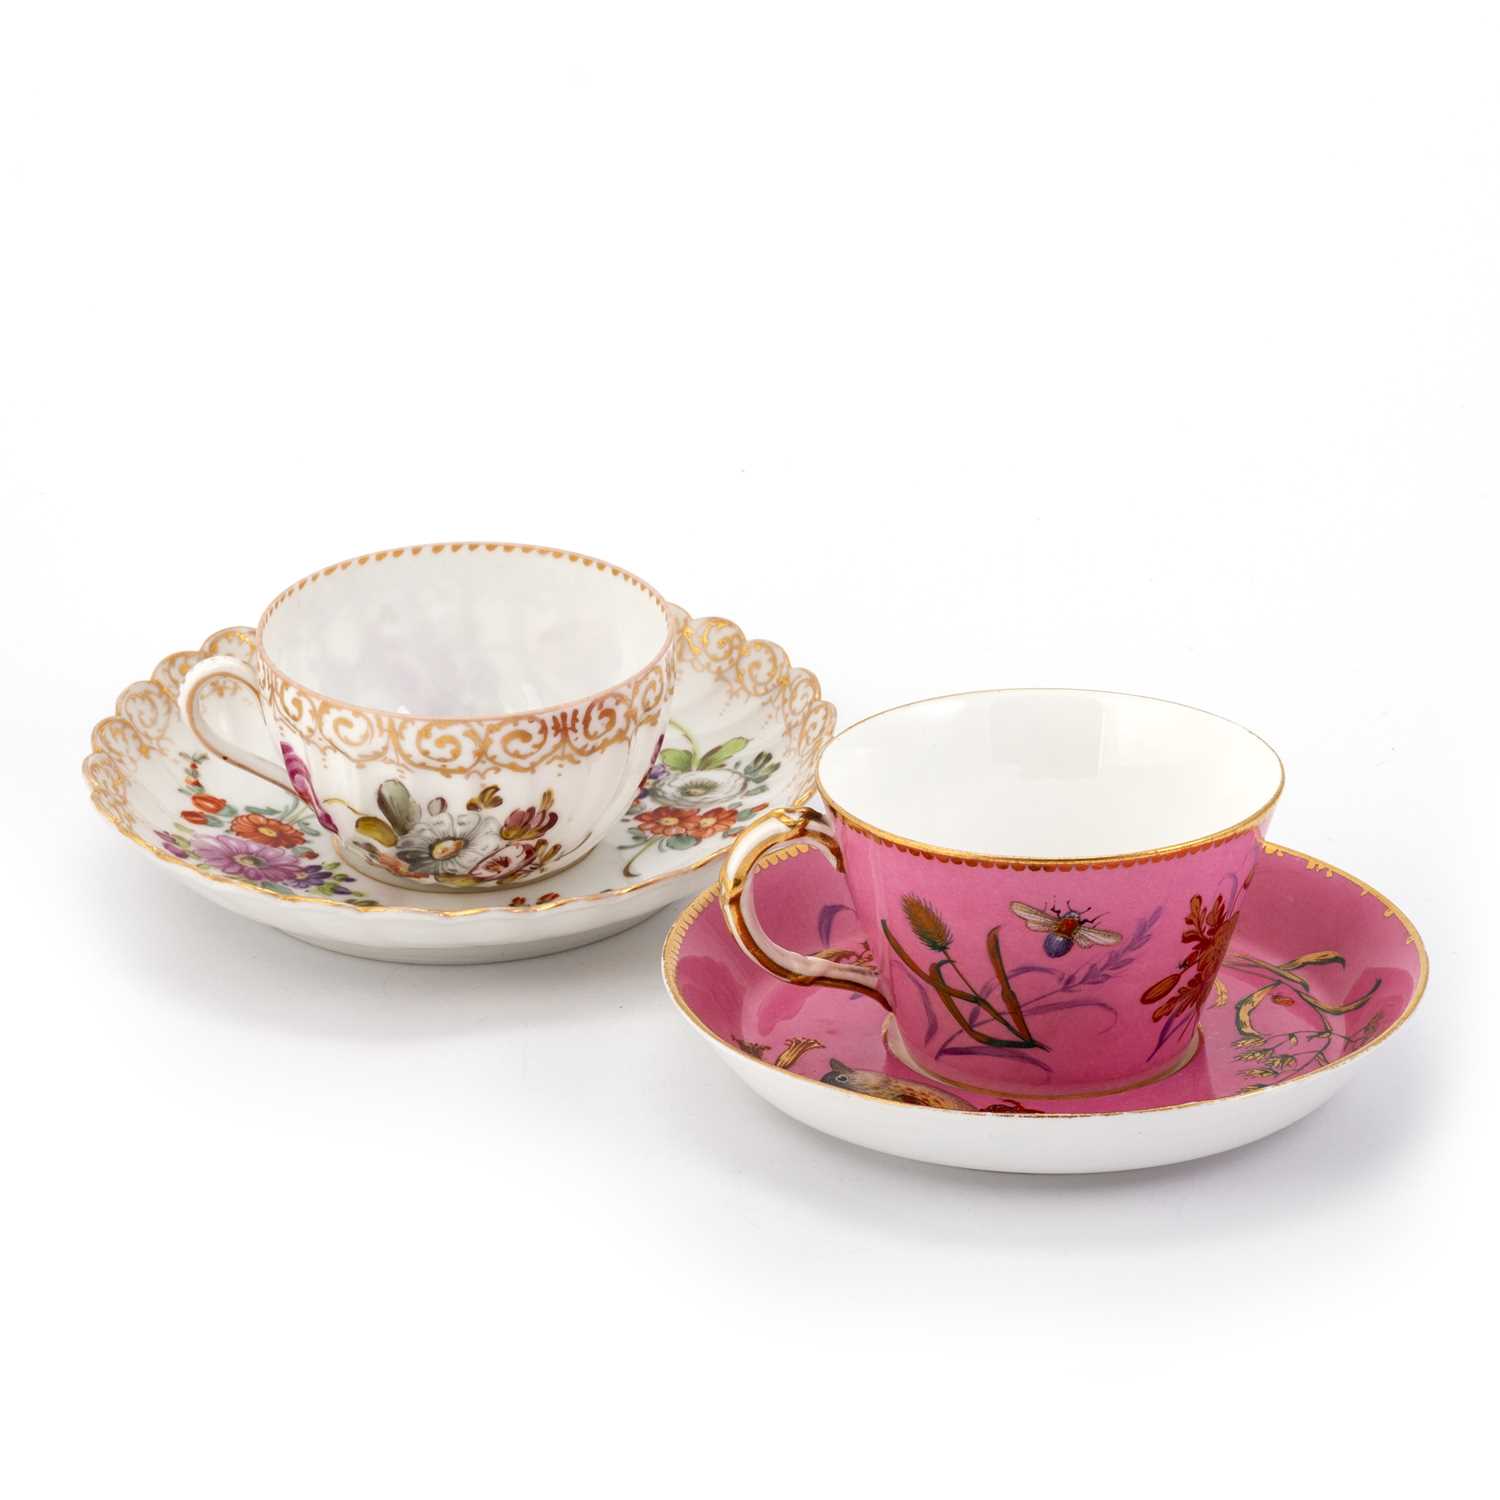 A ROYAL WORCESTER AESTHETIC CUP AND SAUCER, DATE CODES FOR 1876 AND 1877